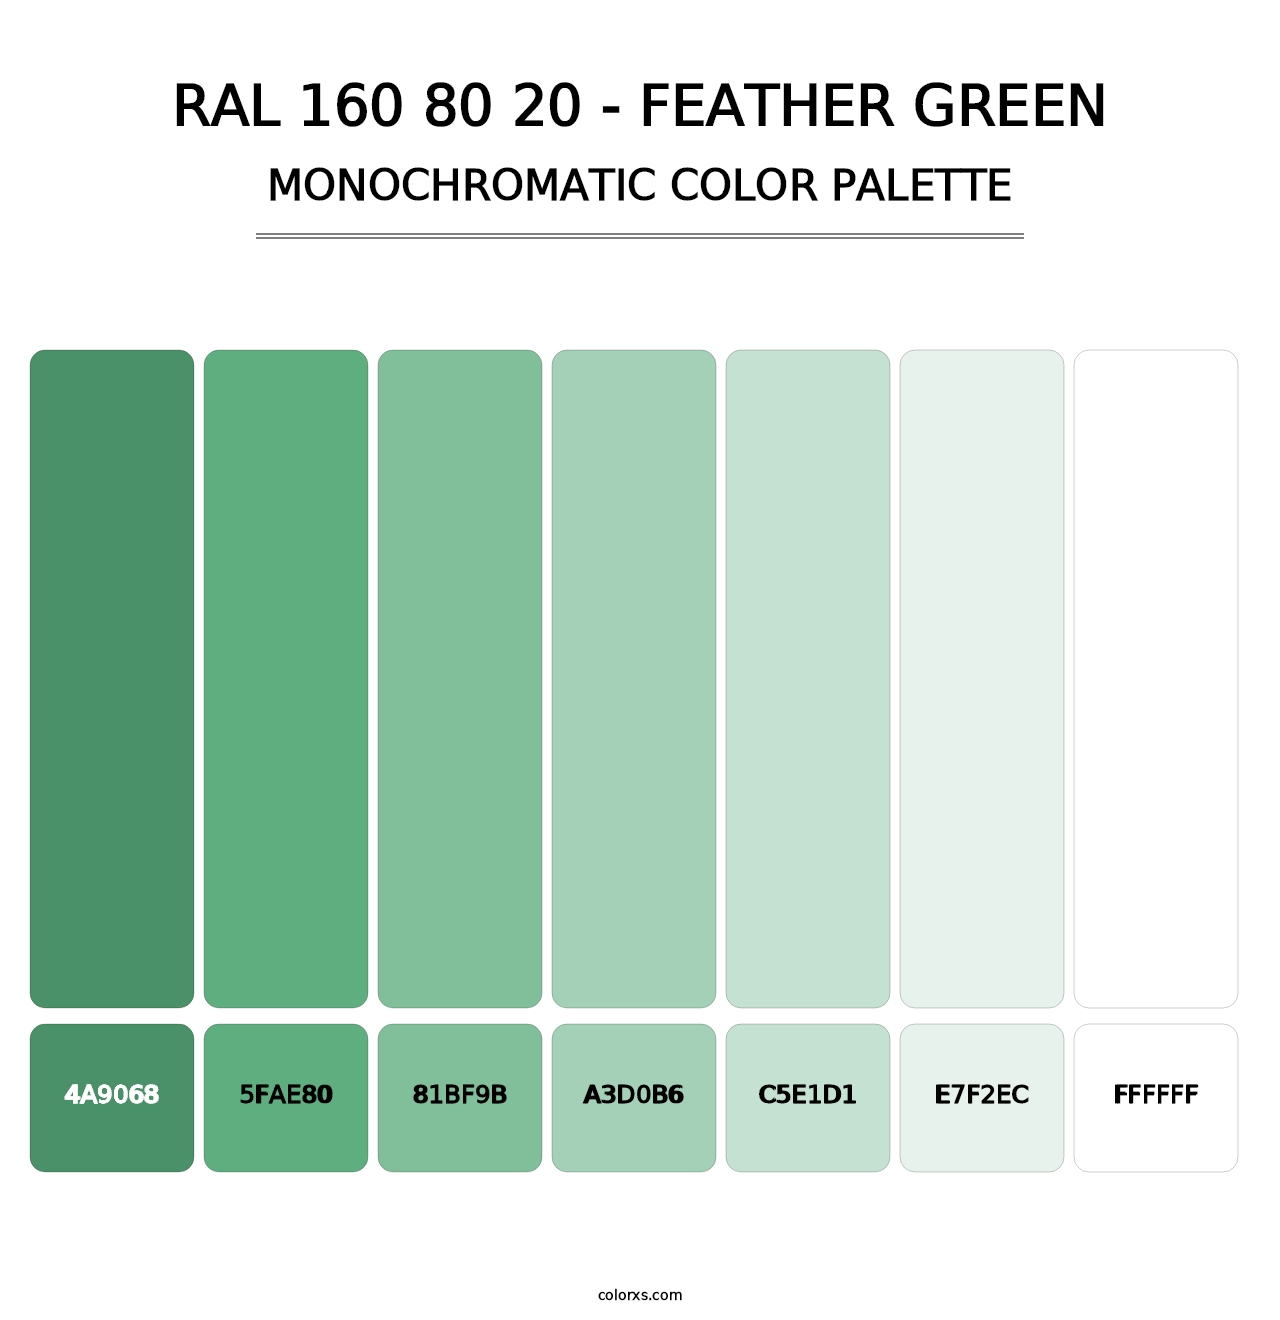 RAL 160 80 20 - Feather Green - Monochromatic Color Palette